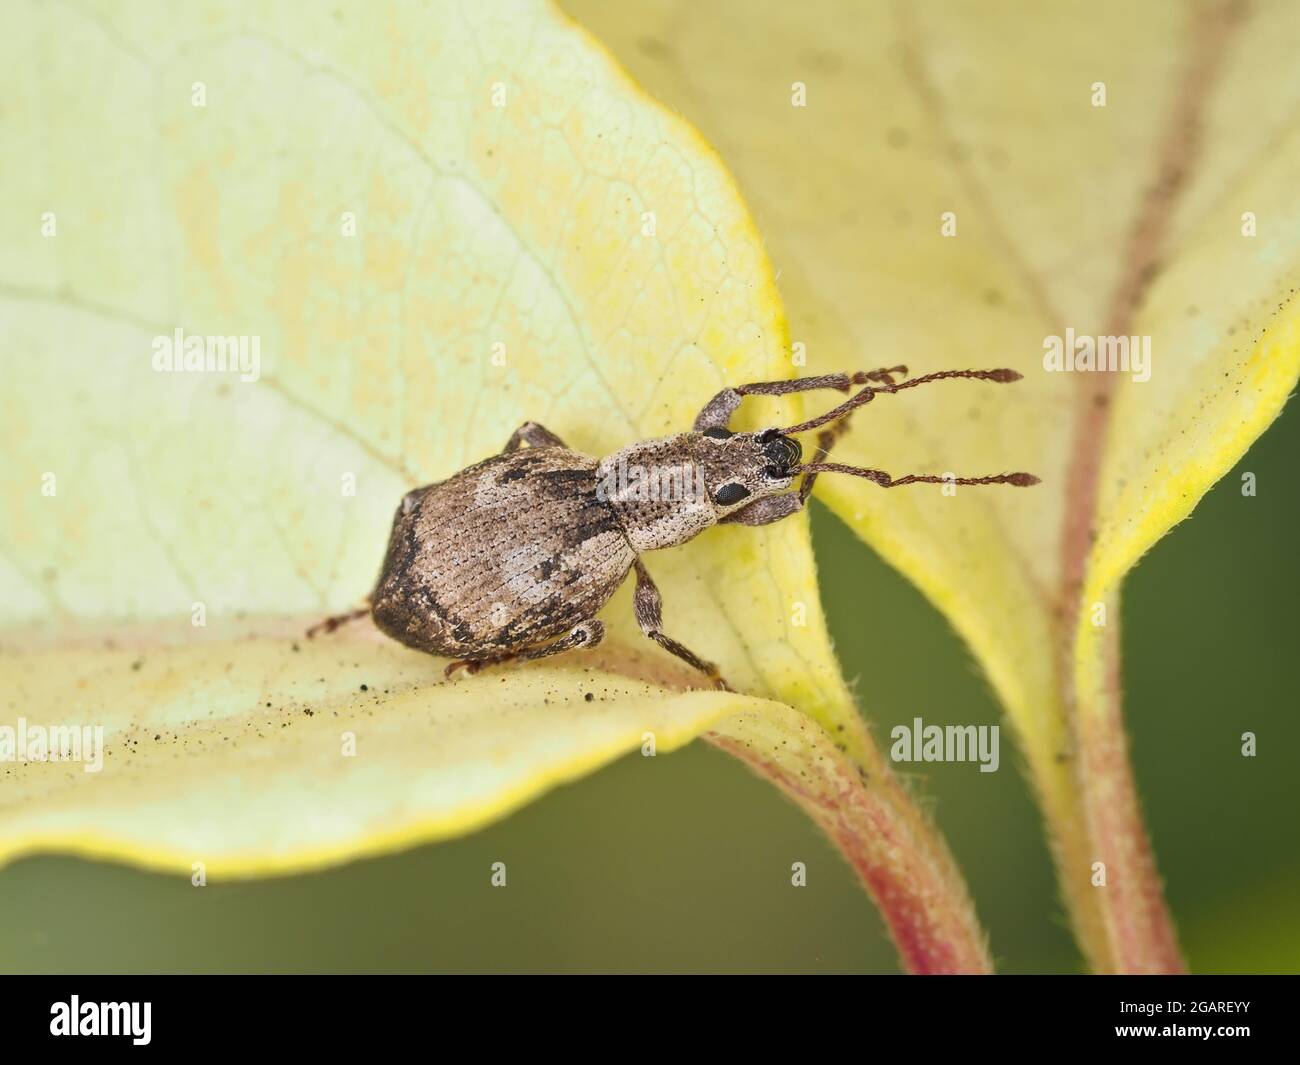 Tiny weevil beetle identified as Sciopithes obscurus - Obscure Root Weevil Stock Photo